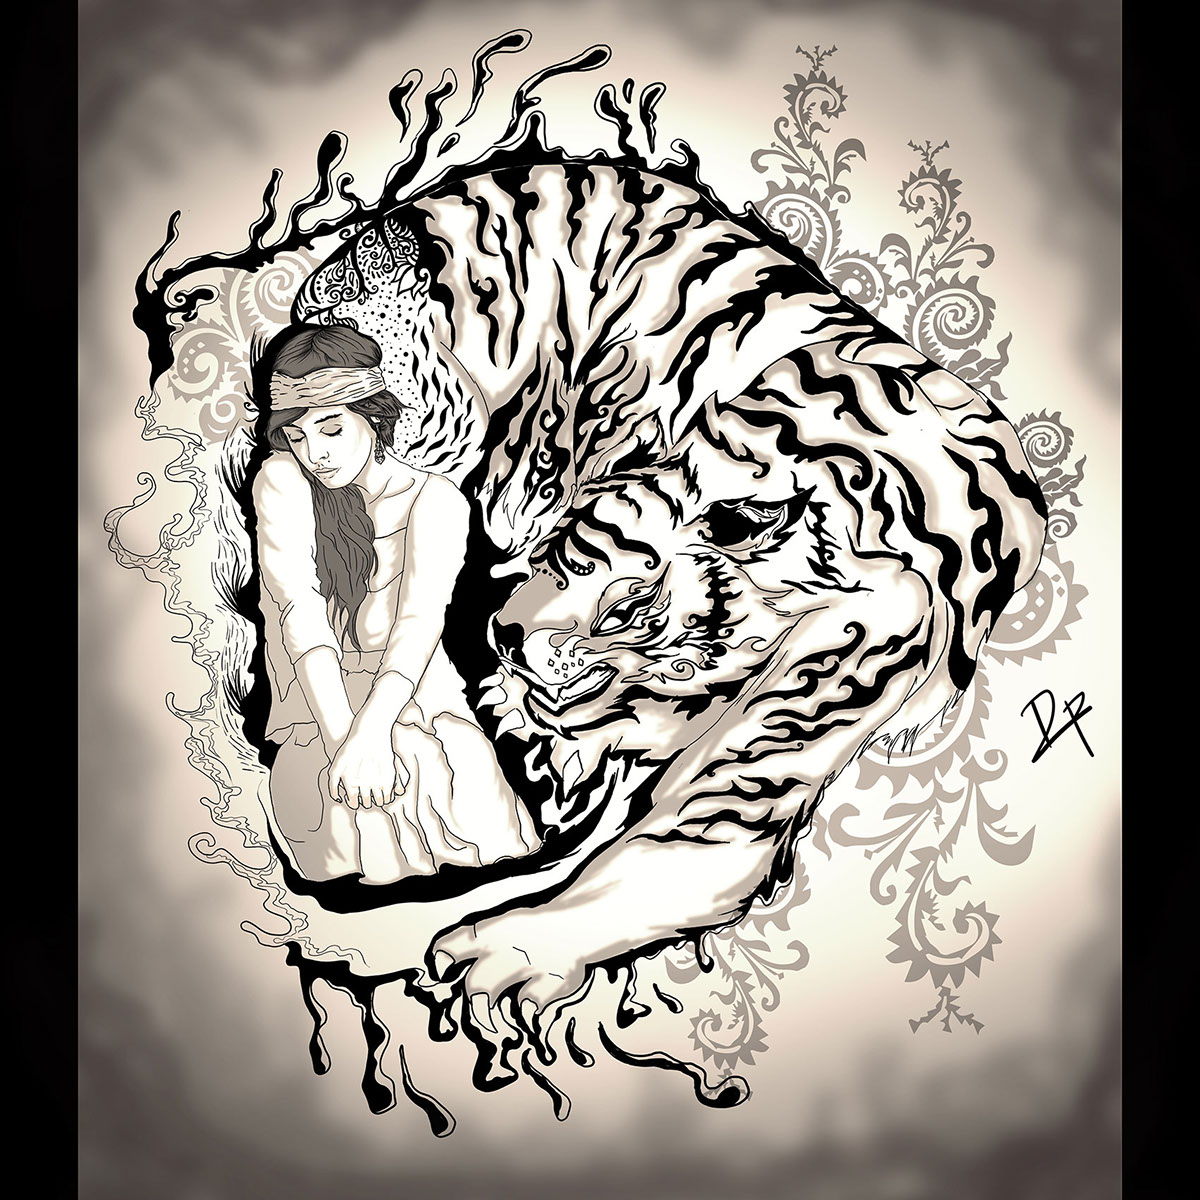 Tattoo Concept - Tiger & Girl on Behance